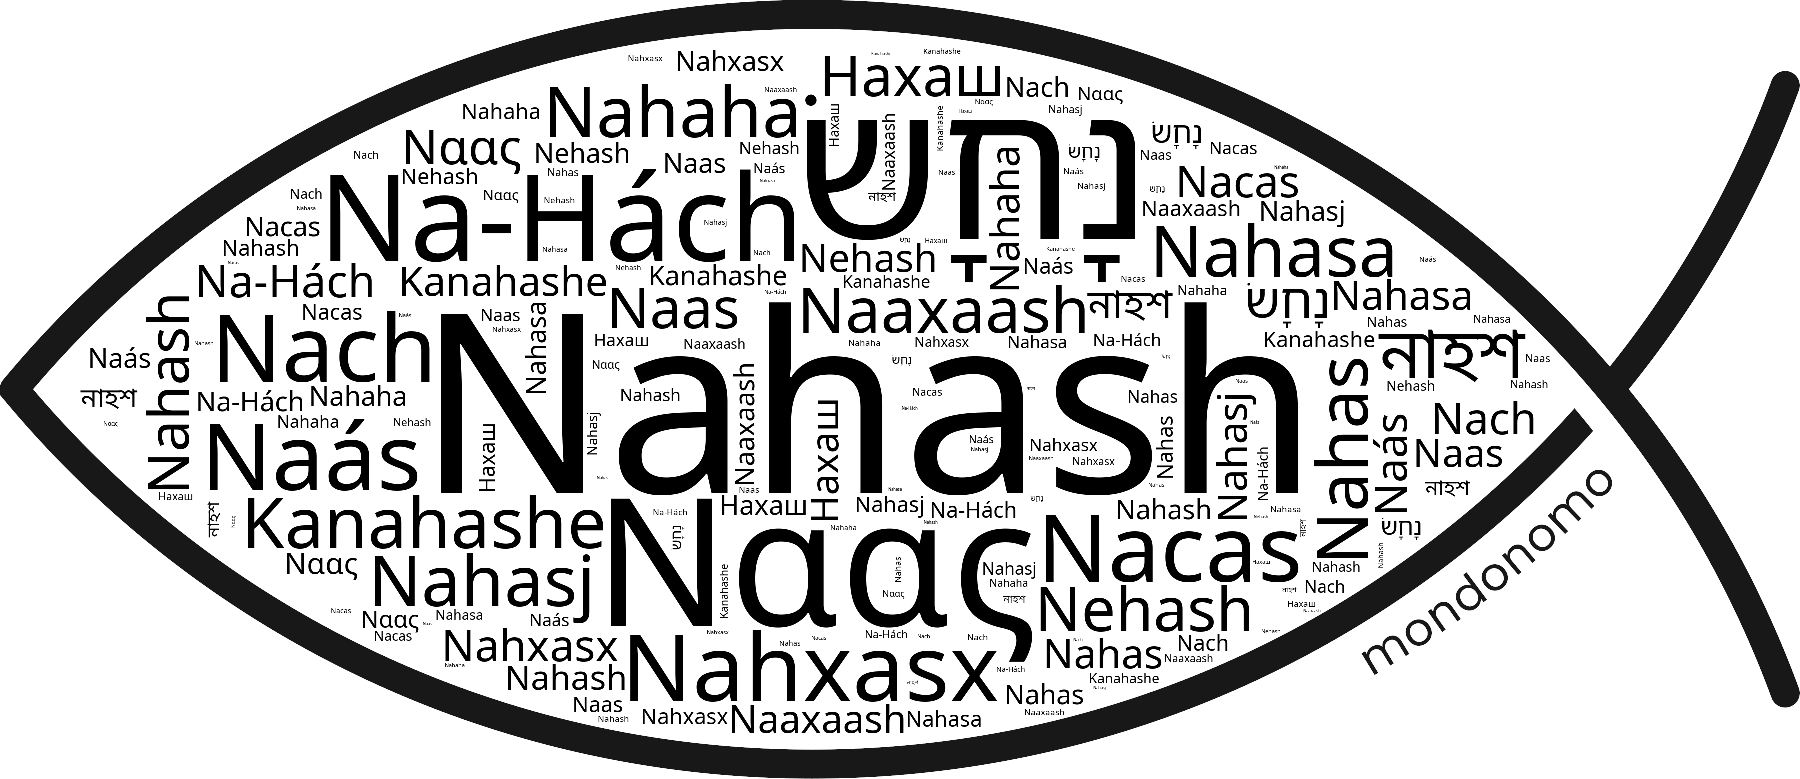 Name Nahash in the world's Bibles